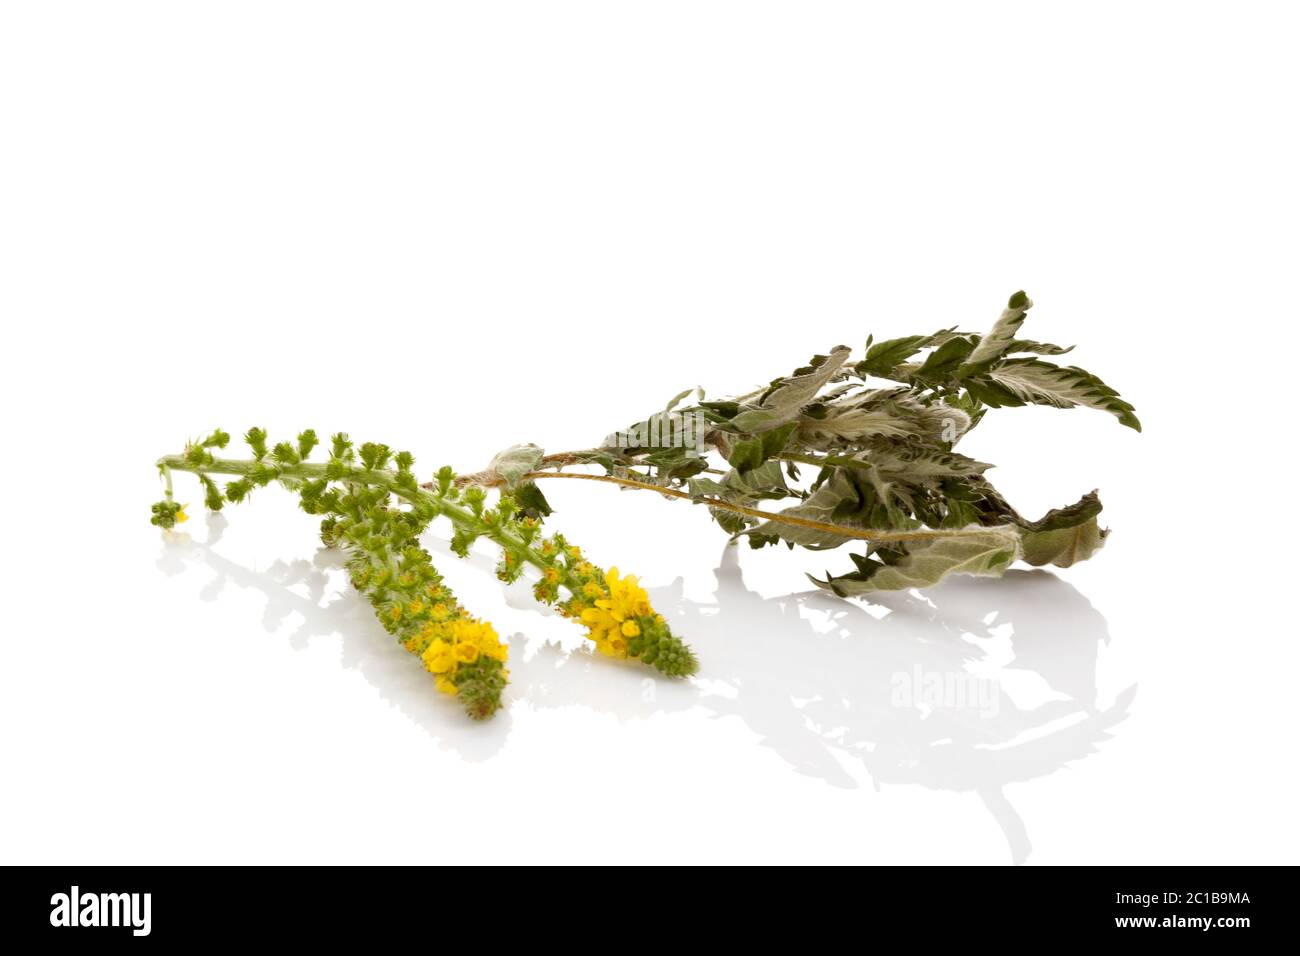 Common agrimony flower with dried leaves Stock Photo